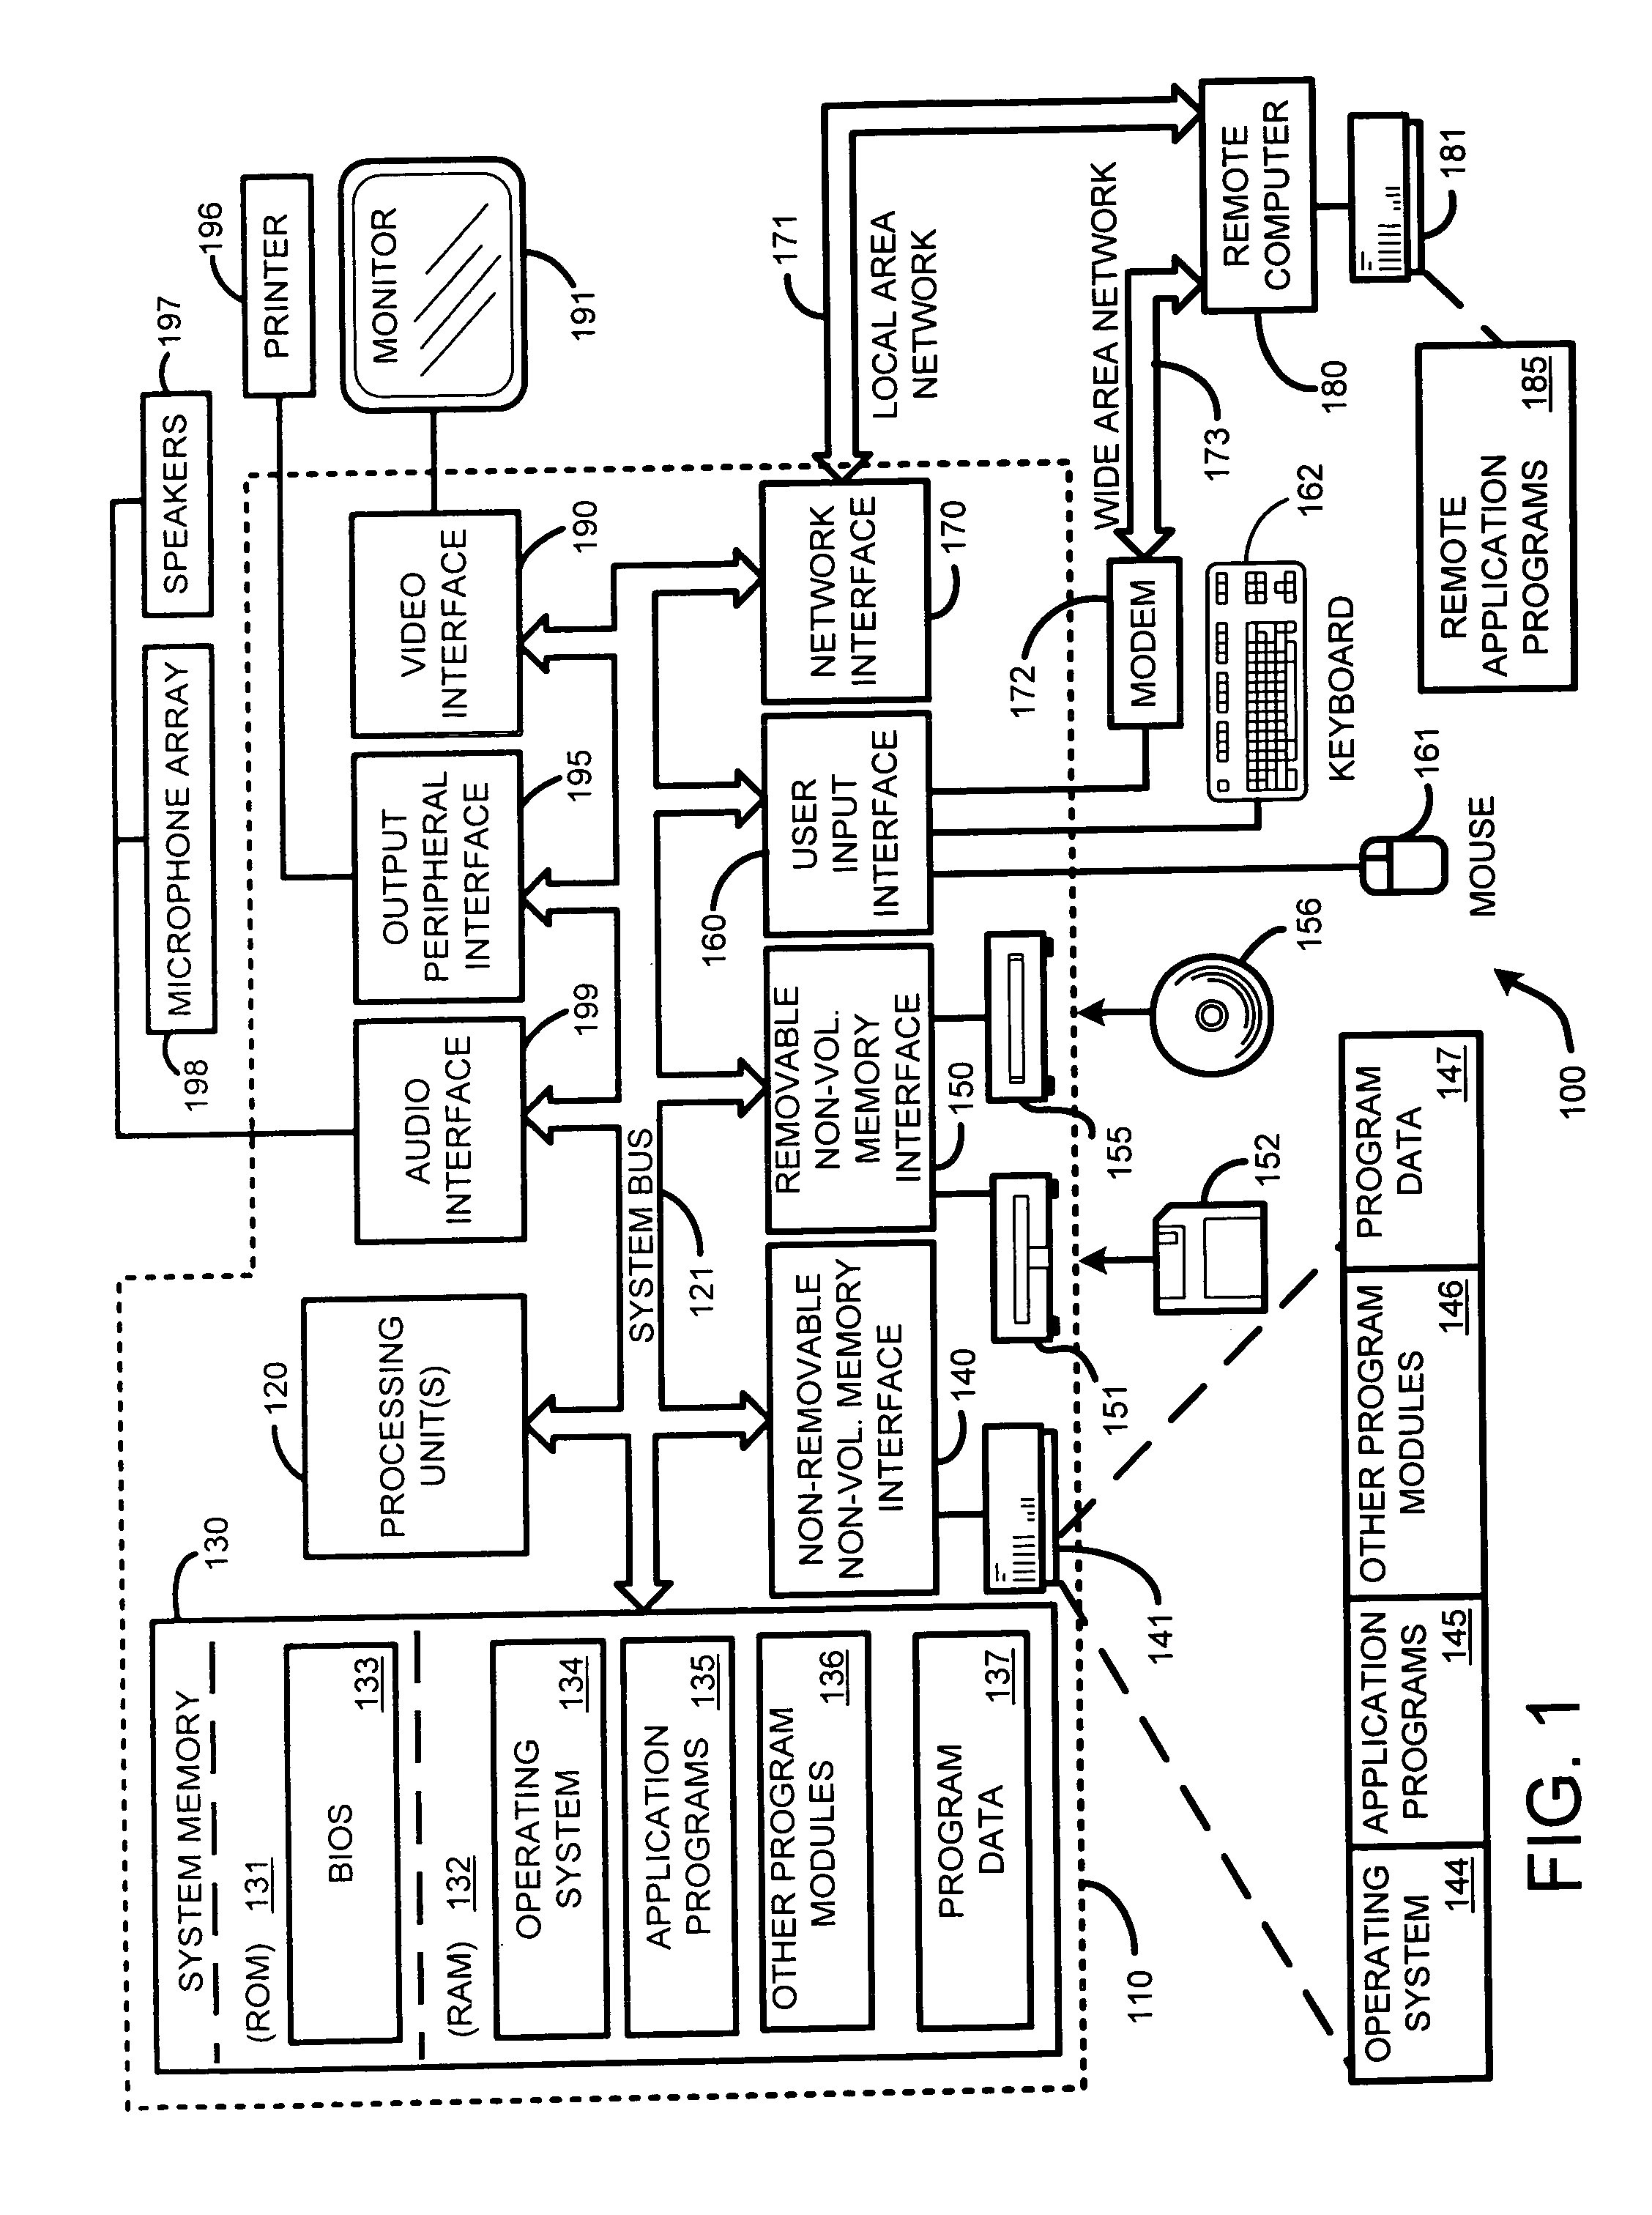 System and method for low-resolution signal rendering from a hierarchical transform representation